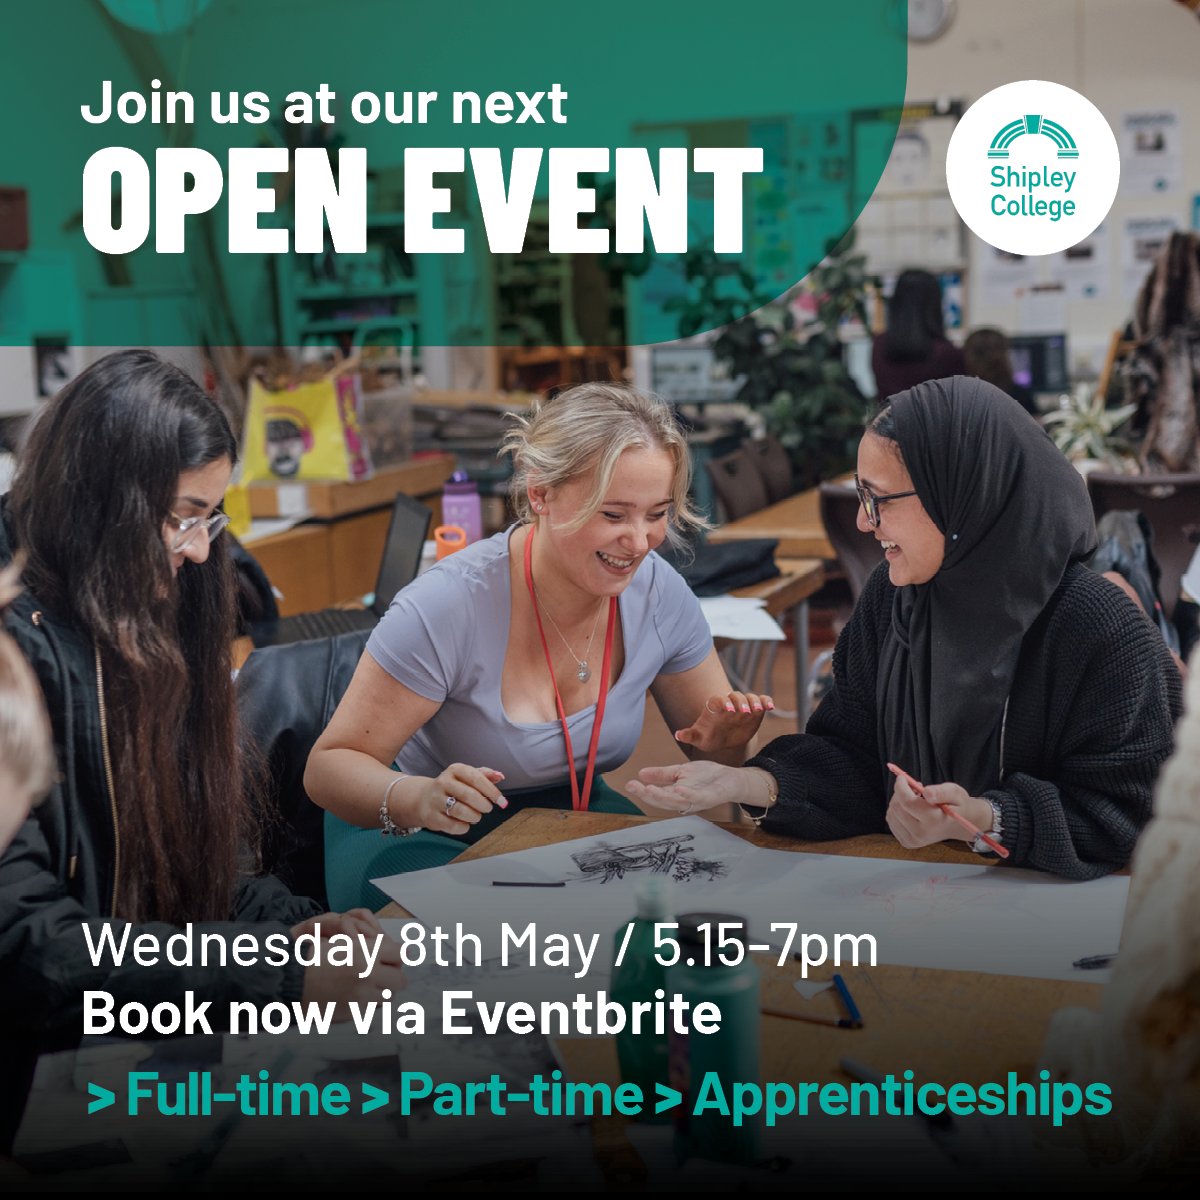 Exam season is approaching & you will be starting to think about your next steps after finishing school. It can be quite an overwhelming time but don’t panic! Our next open event is 8th of May & we’re here to help you choose your next adventure! Pre-reg: bit.ly/49CLOUE